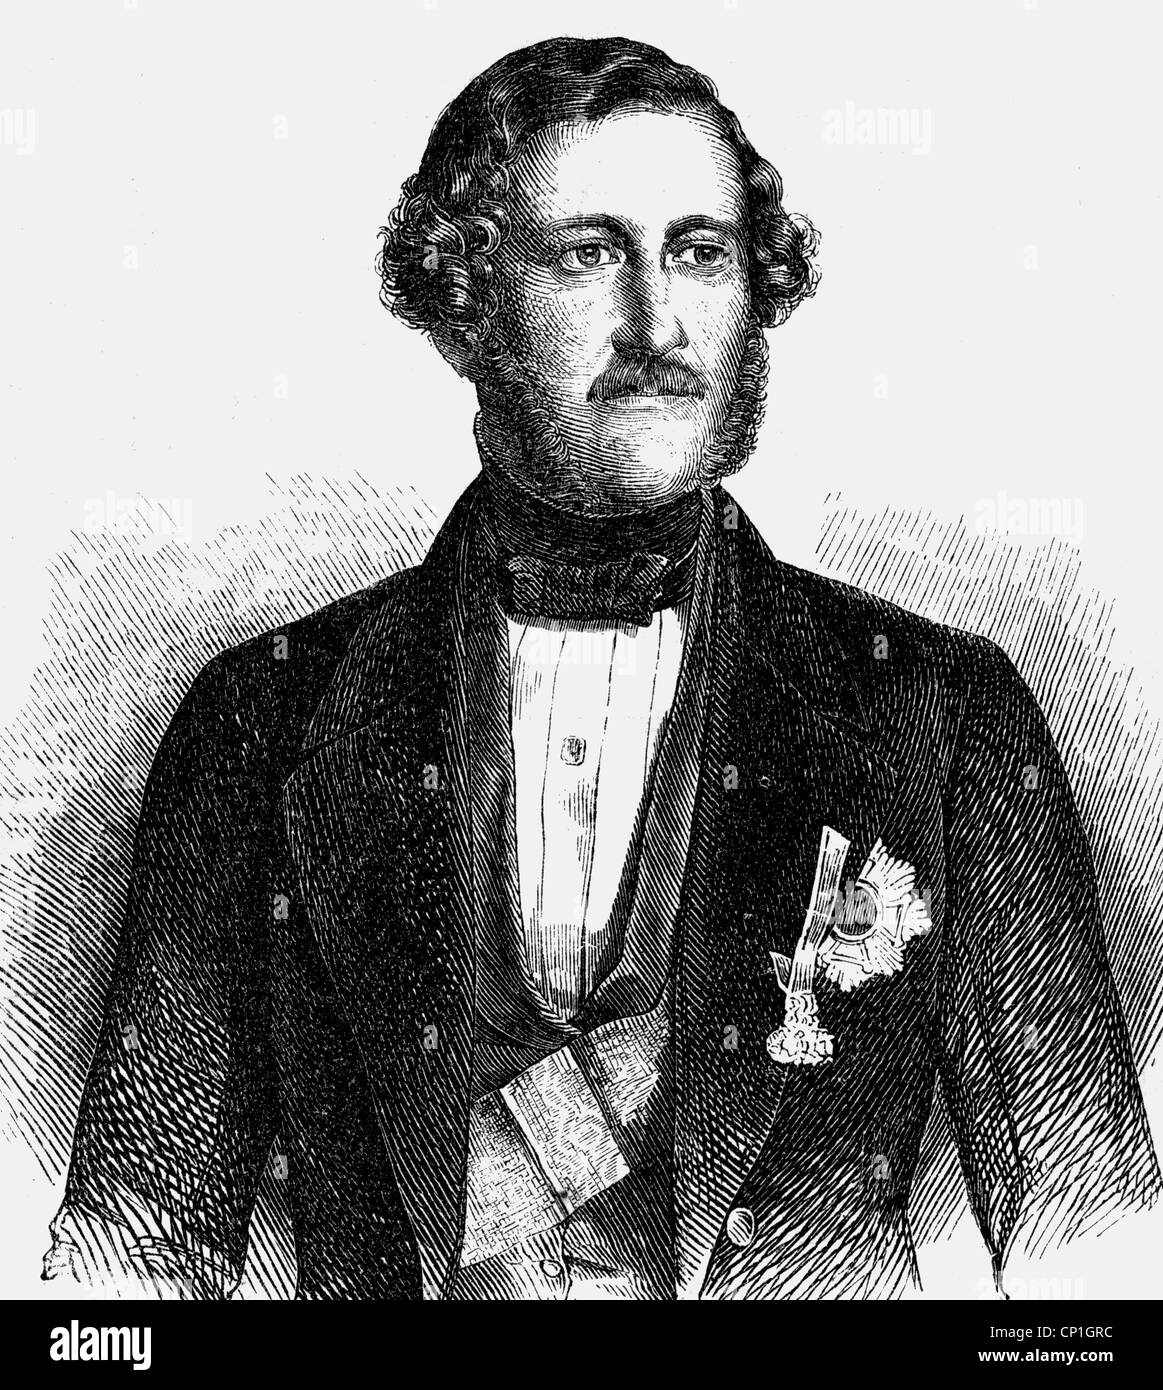 Oettingen-Wallerstein, Ludwig Kraft Prince of, 31.1.1791 - 22.6.1870, German politician, Bavarian Foreign Minister 1847 - 1848, portrait, wood engraving, 1847, , Stock Photo